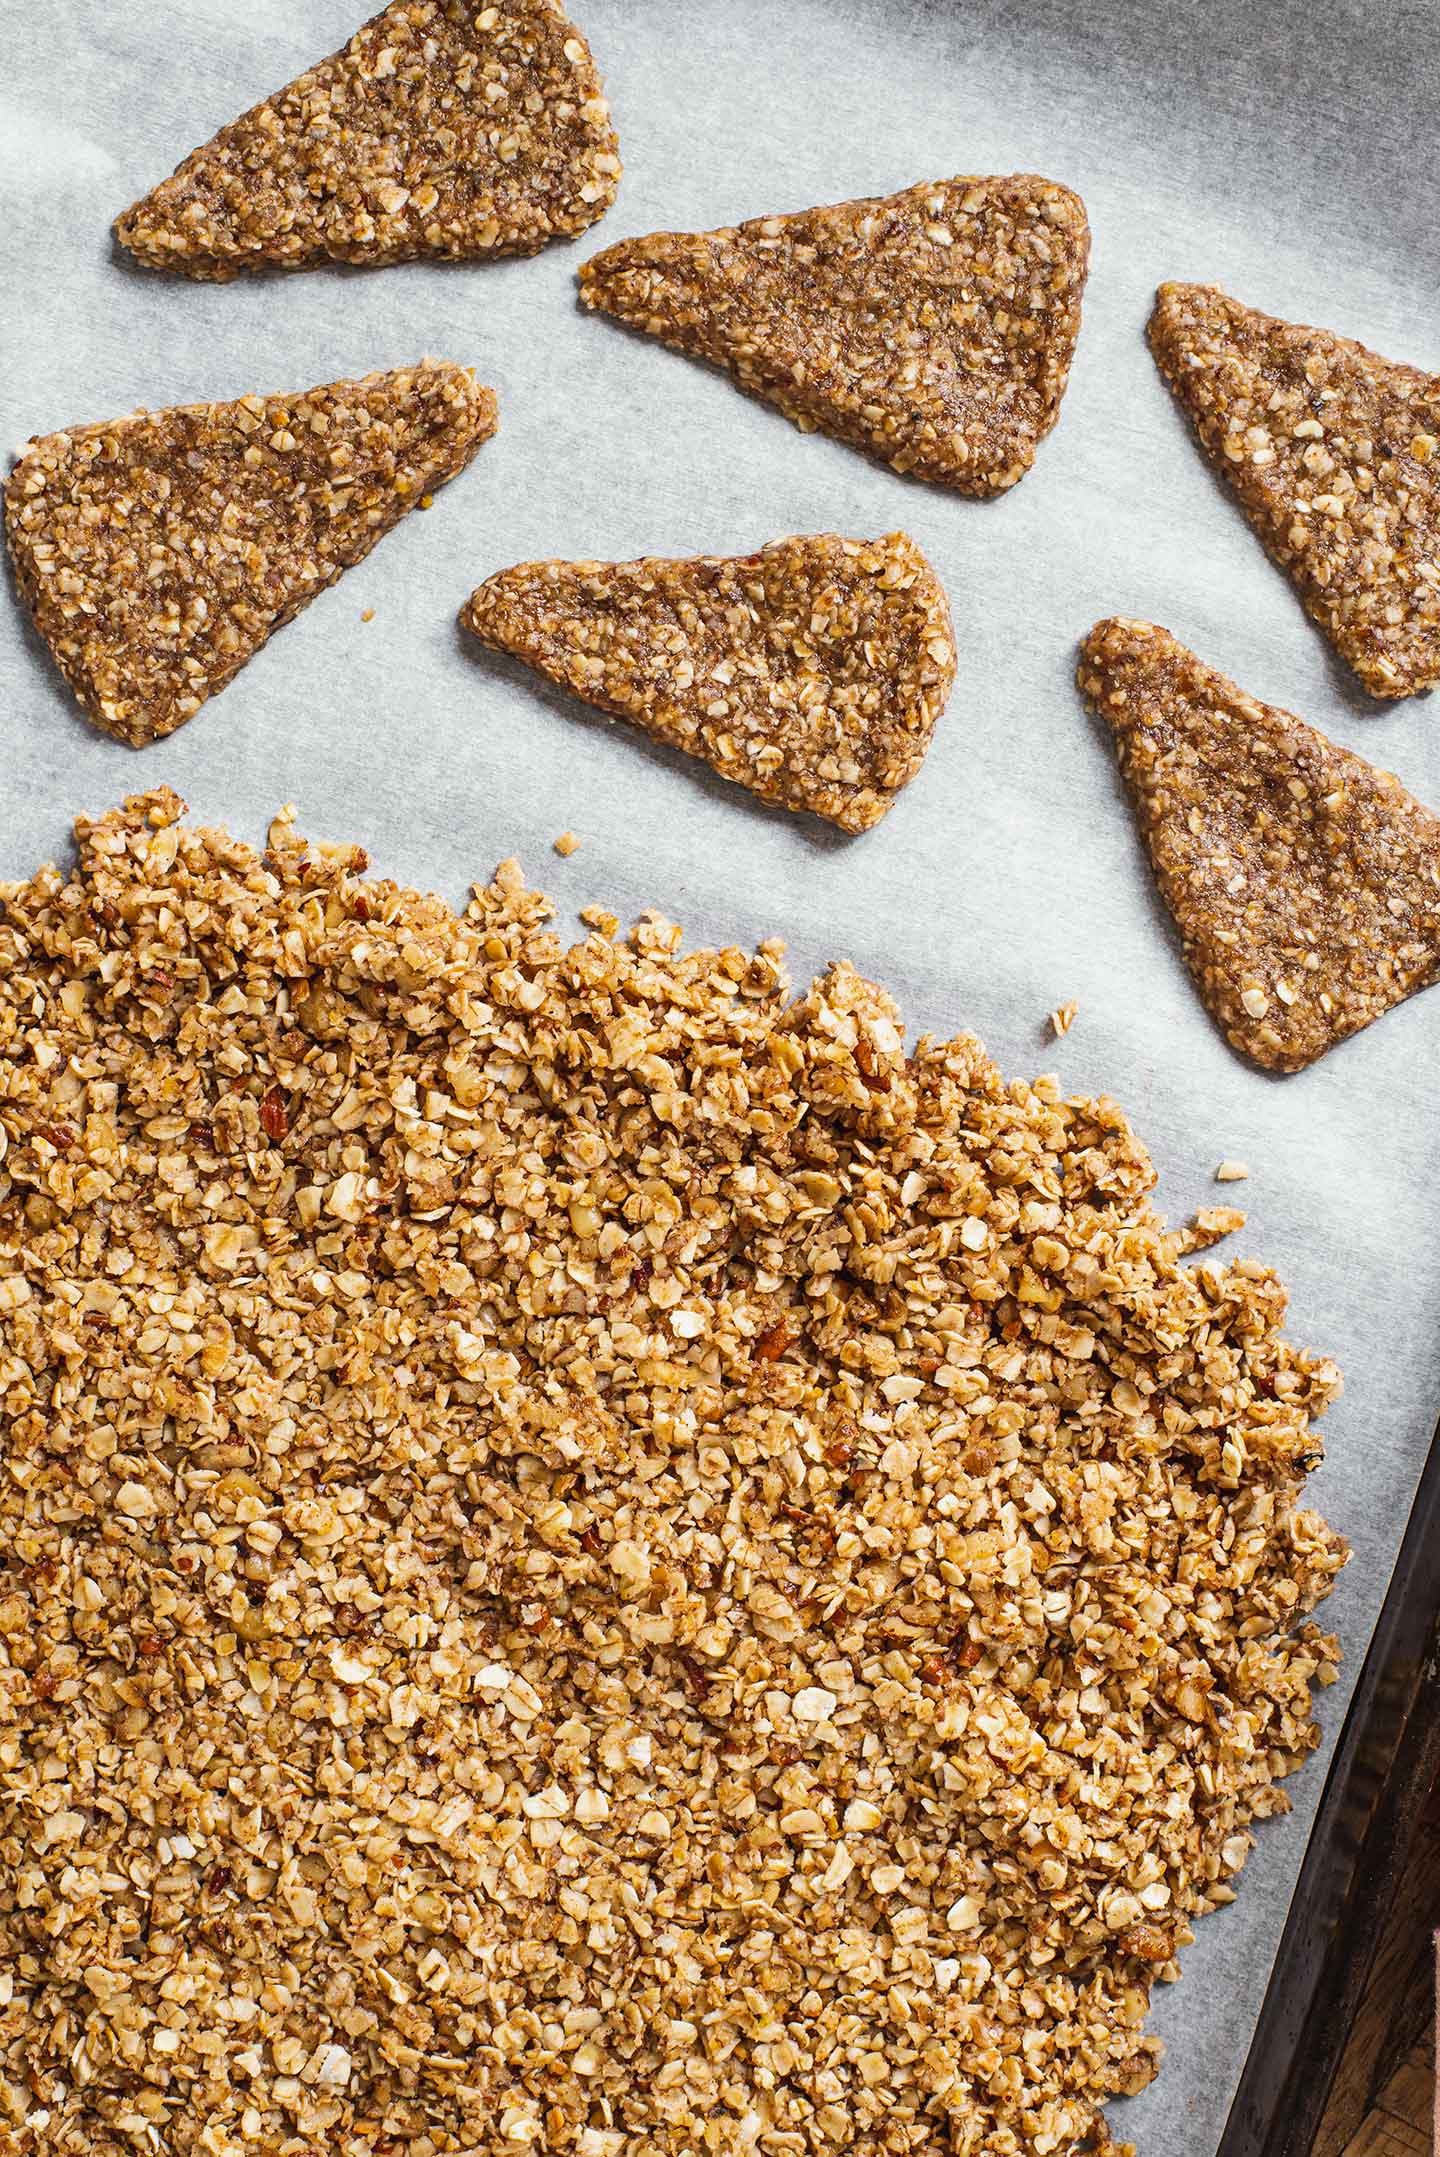 Top down view of the granola and pie shaped cookies on a parchment lined baking sheet.